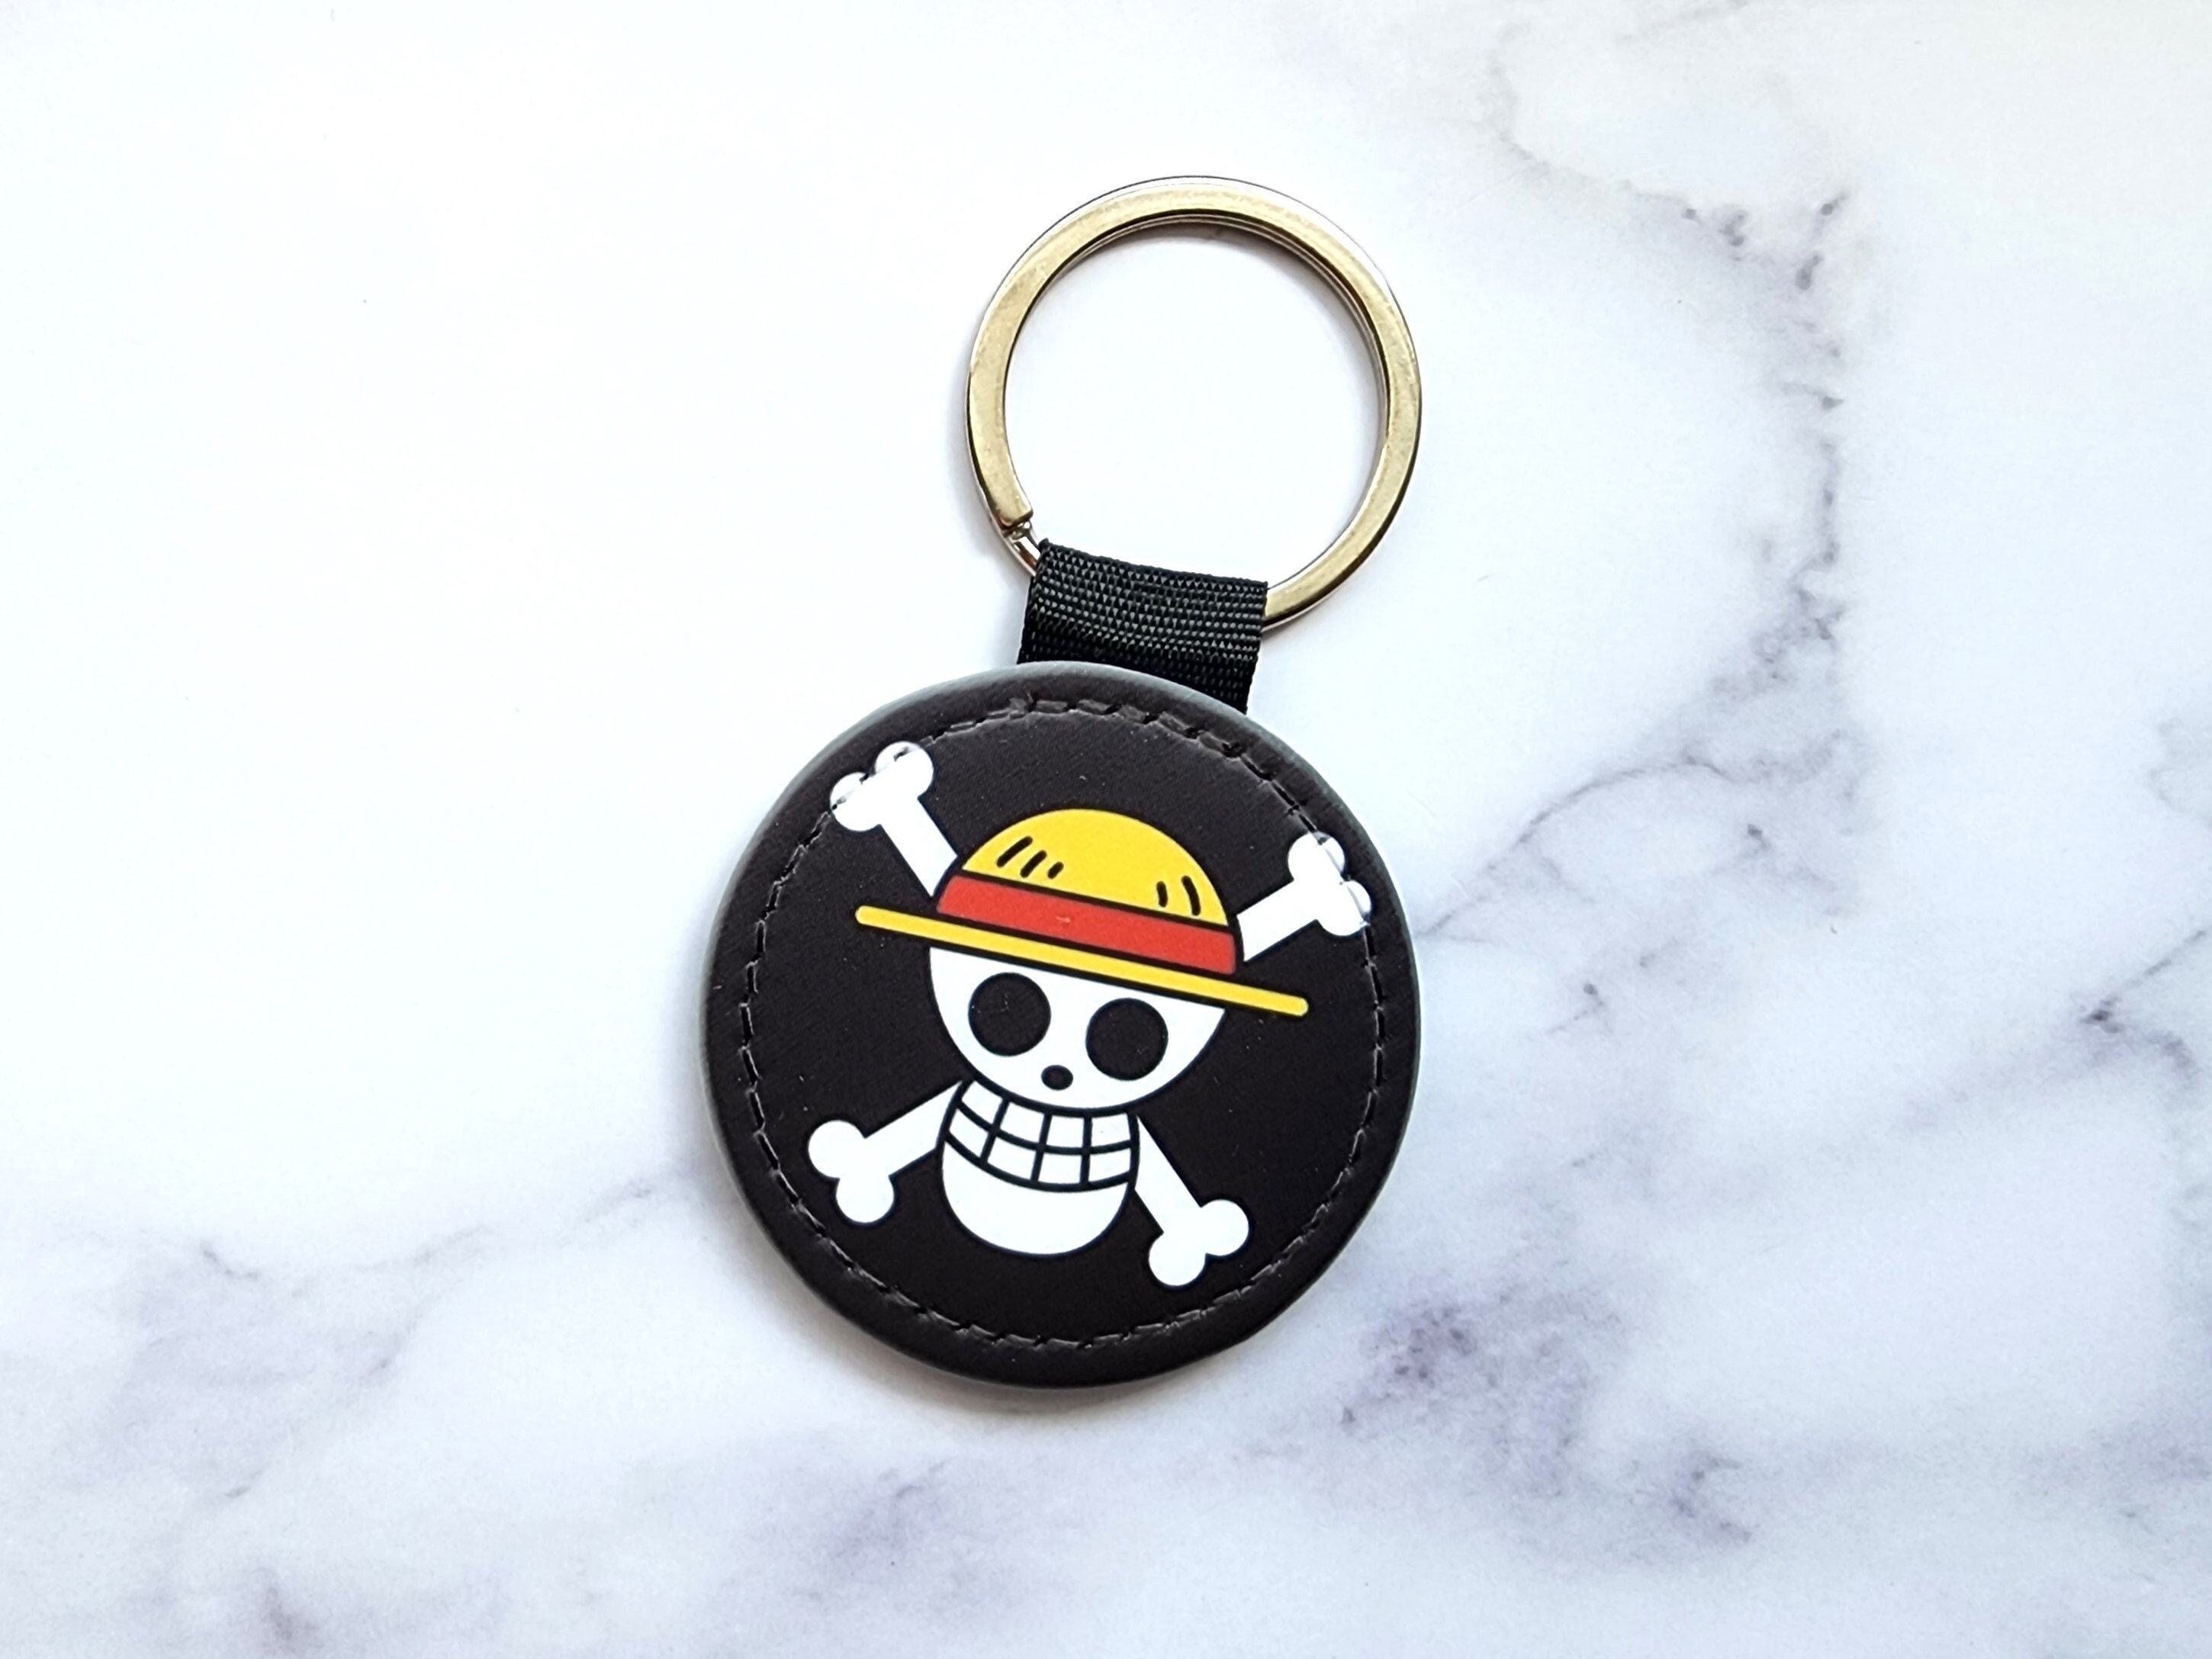 Music Chests One Piece - Cute Acrylic Keychains Ace